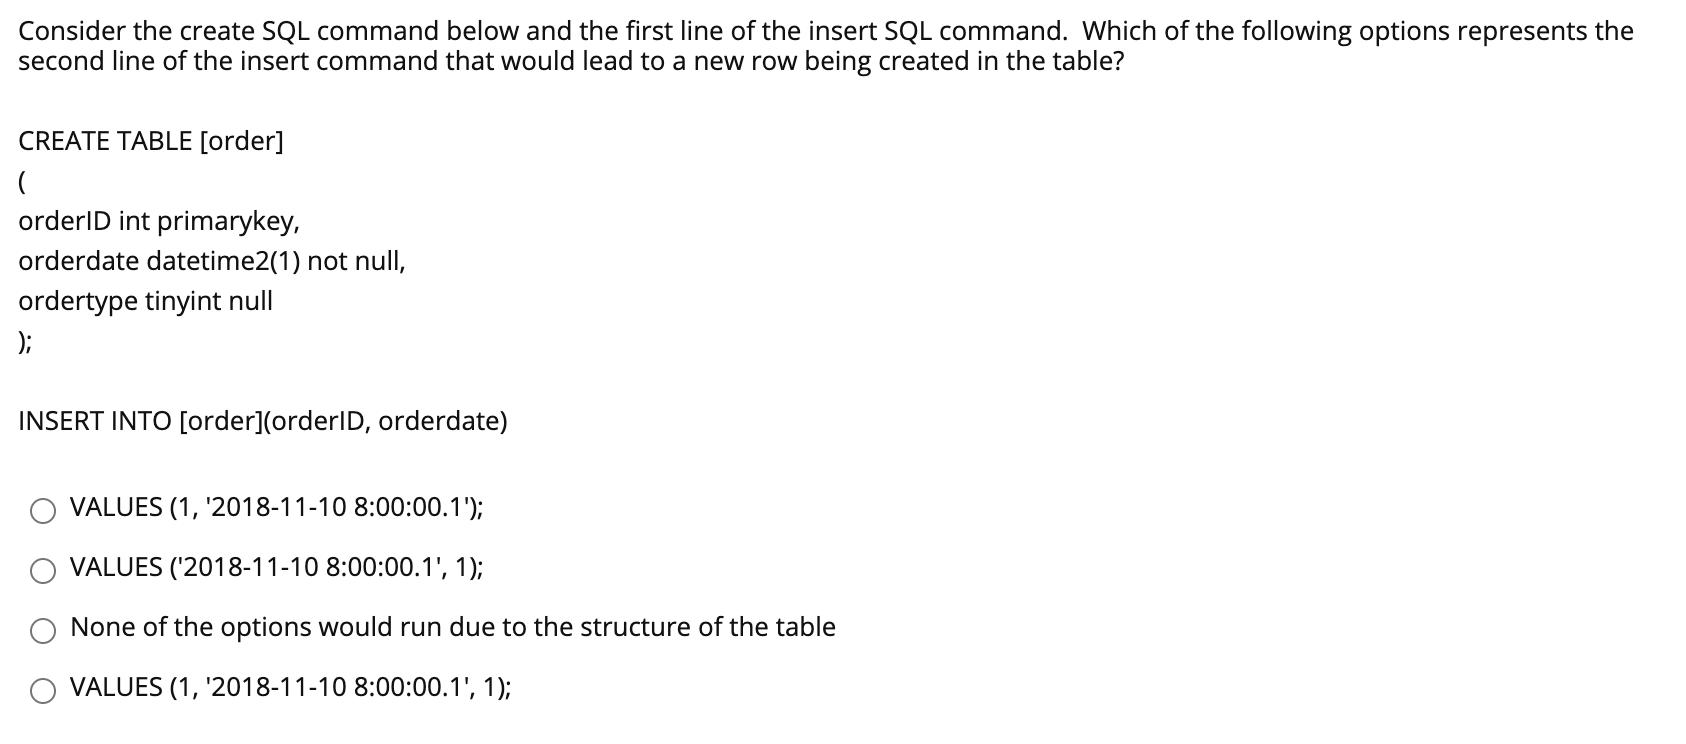 Consider the create SQL command below and the first line of the insert SQL command. Which of the following